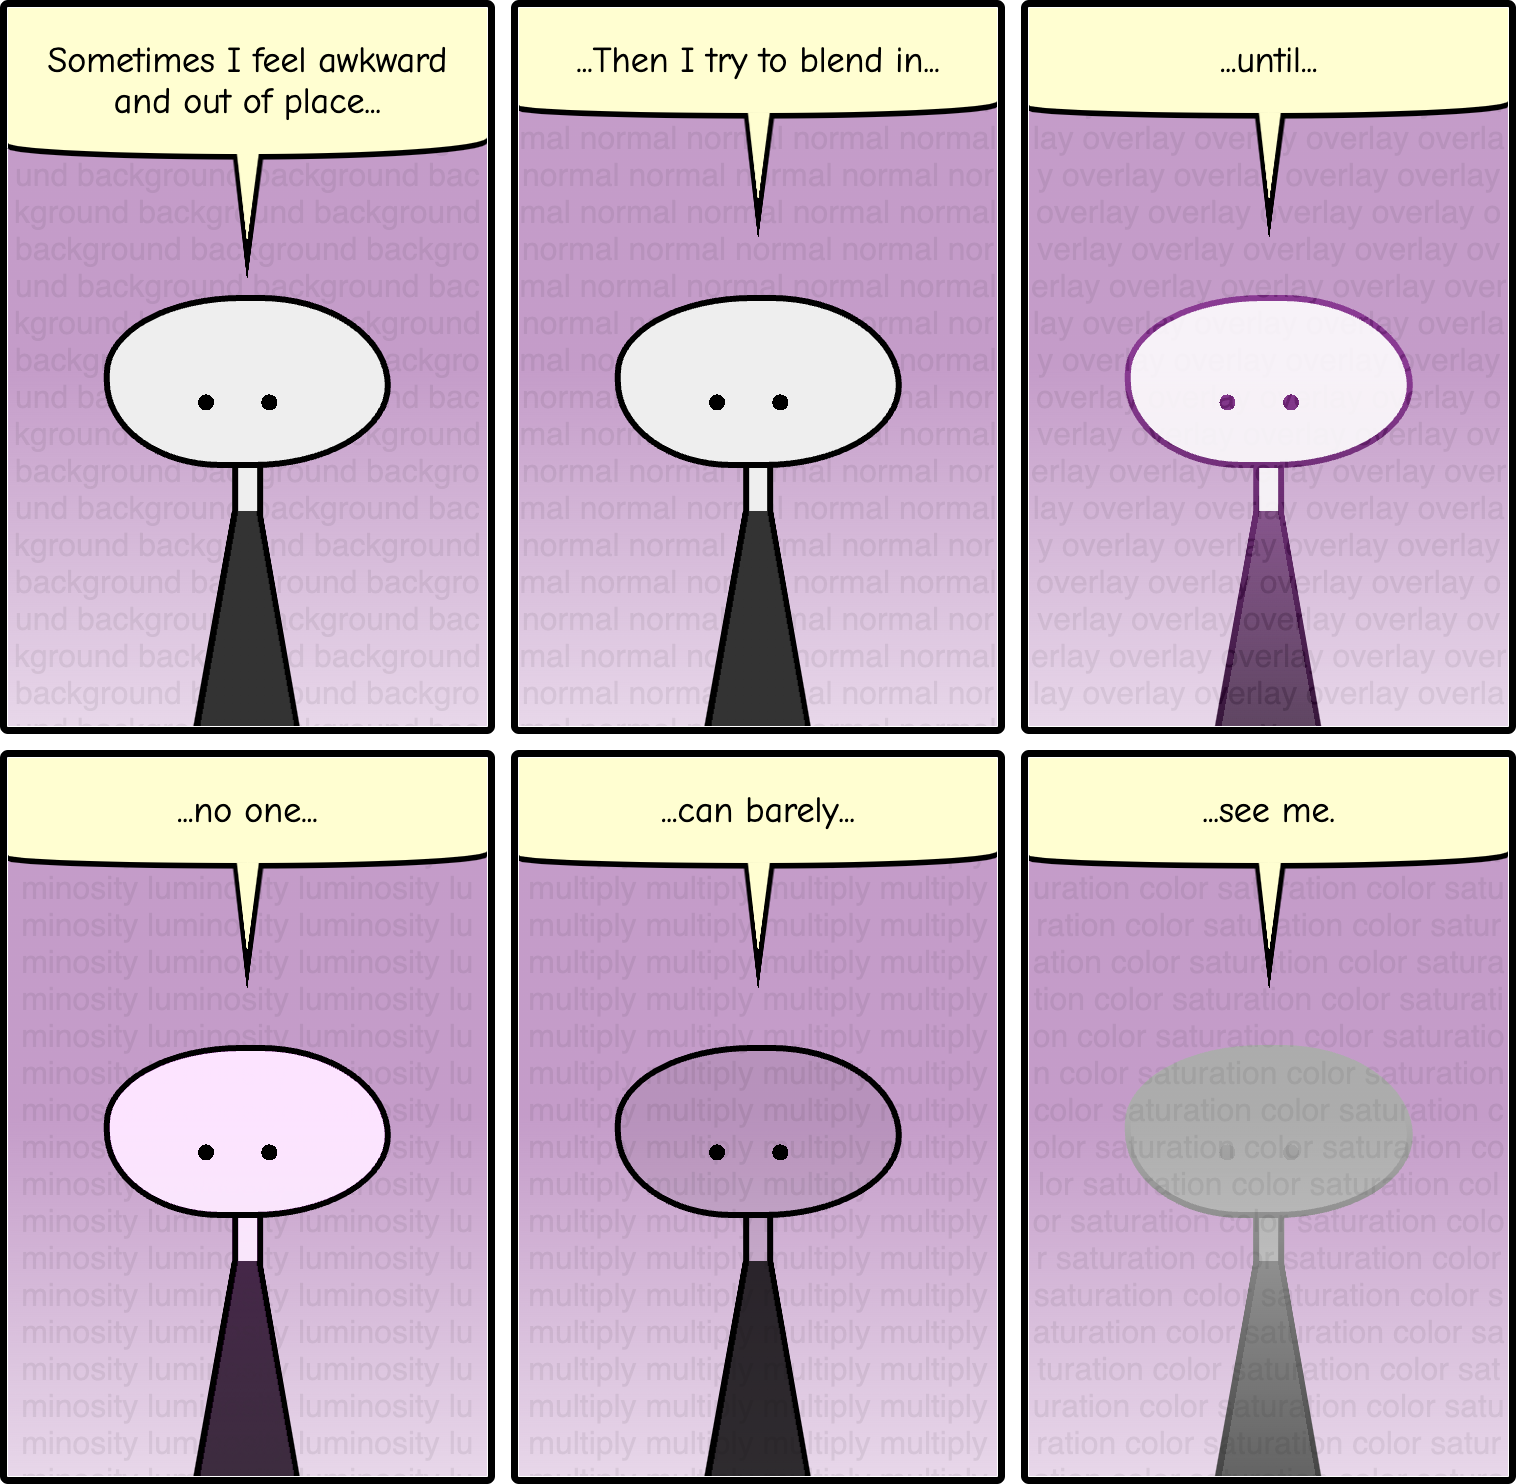 Cartoon with 6 panels showing a minimalistic character that says 'Sometimes I feel awkward and out of place... then I try to blend in... until... no on... can barely... see me.'. Different mix-blend-modes have been applied to the character so in each panel it looks more transparent or with grayer/paler colors.